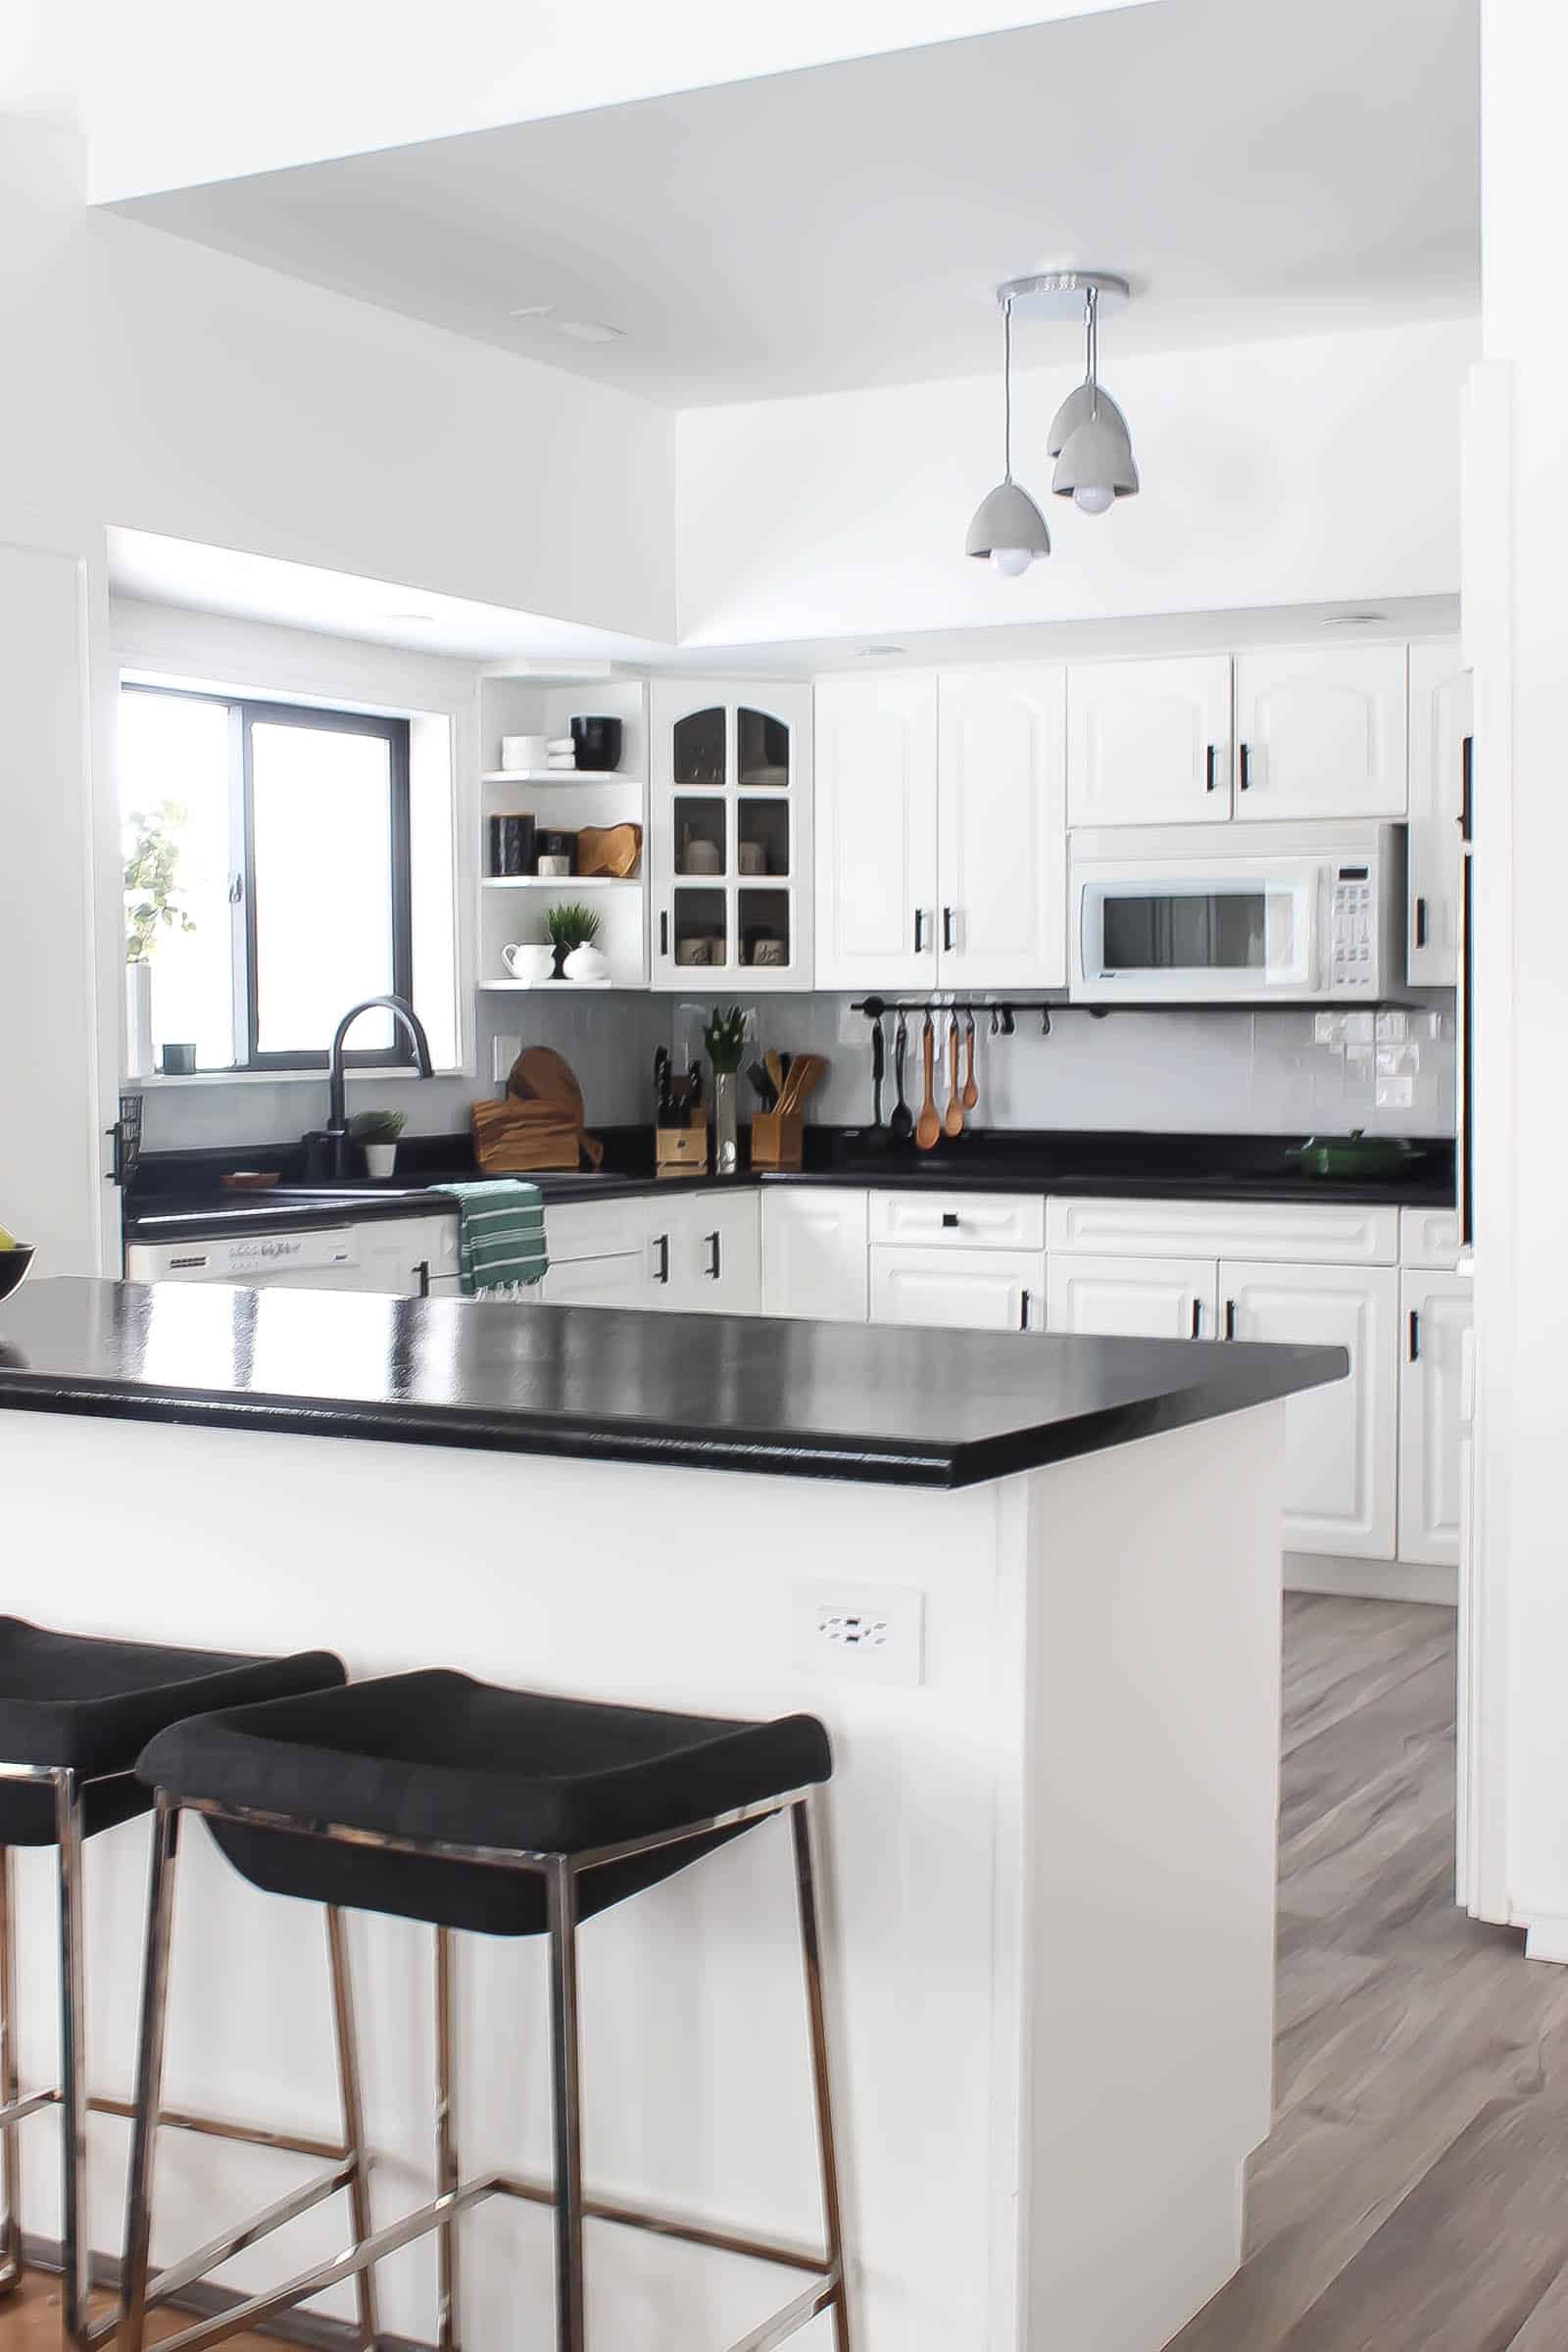 Modern white and black kitchen with glass tile